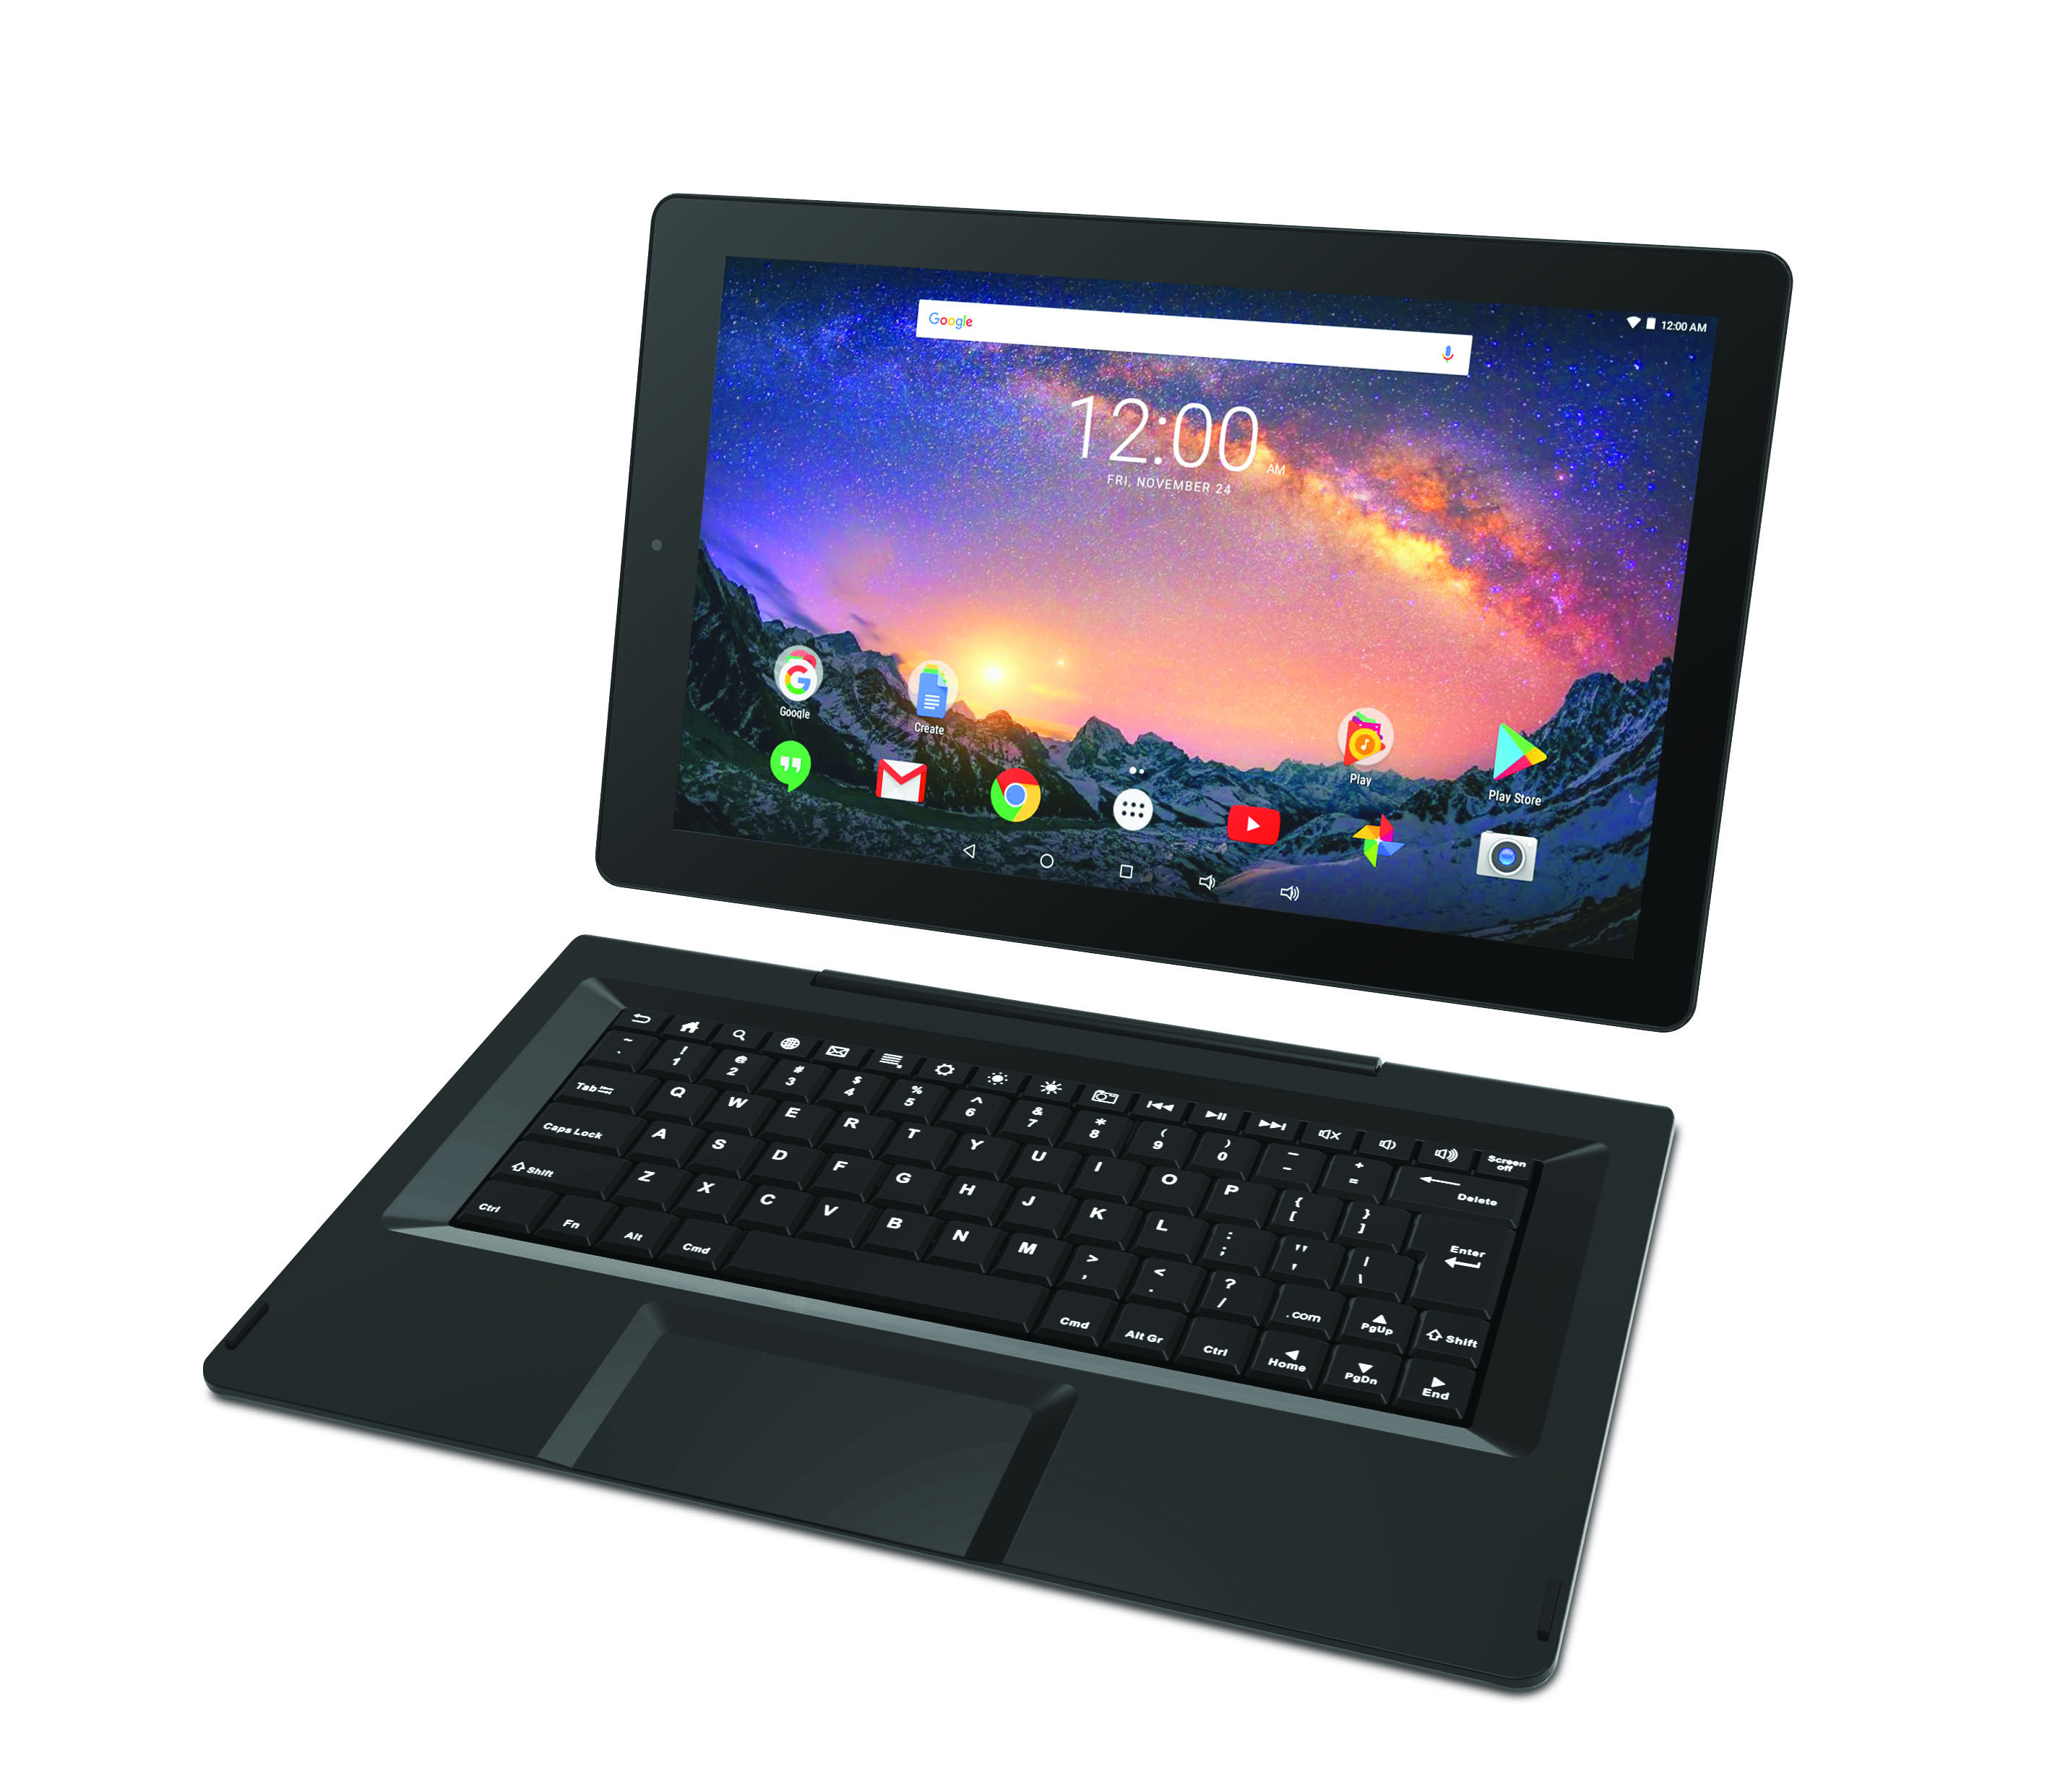 RCA Galileo Pro 11.5" 32GB 2-in-1 Tablet with Keyboard Case Android OS, Charcoal (Google Classroom Ready) - image 3 of 5